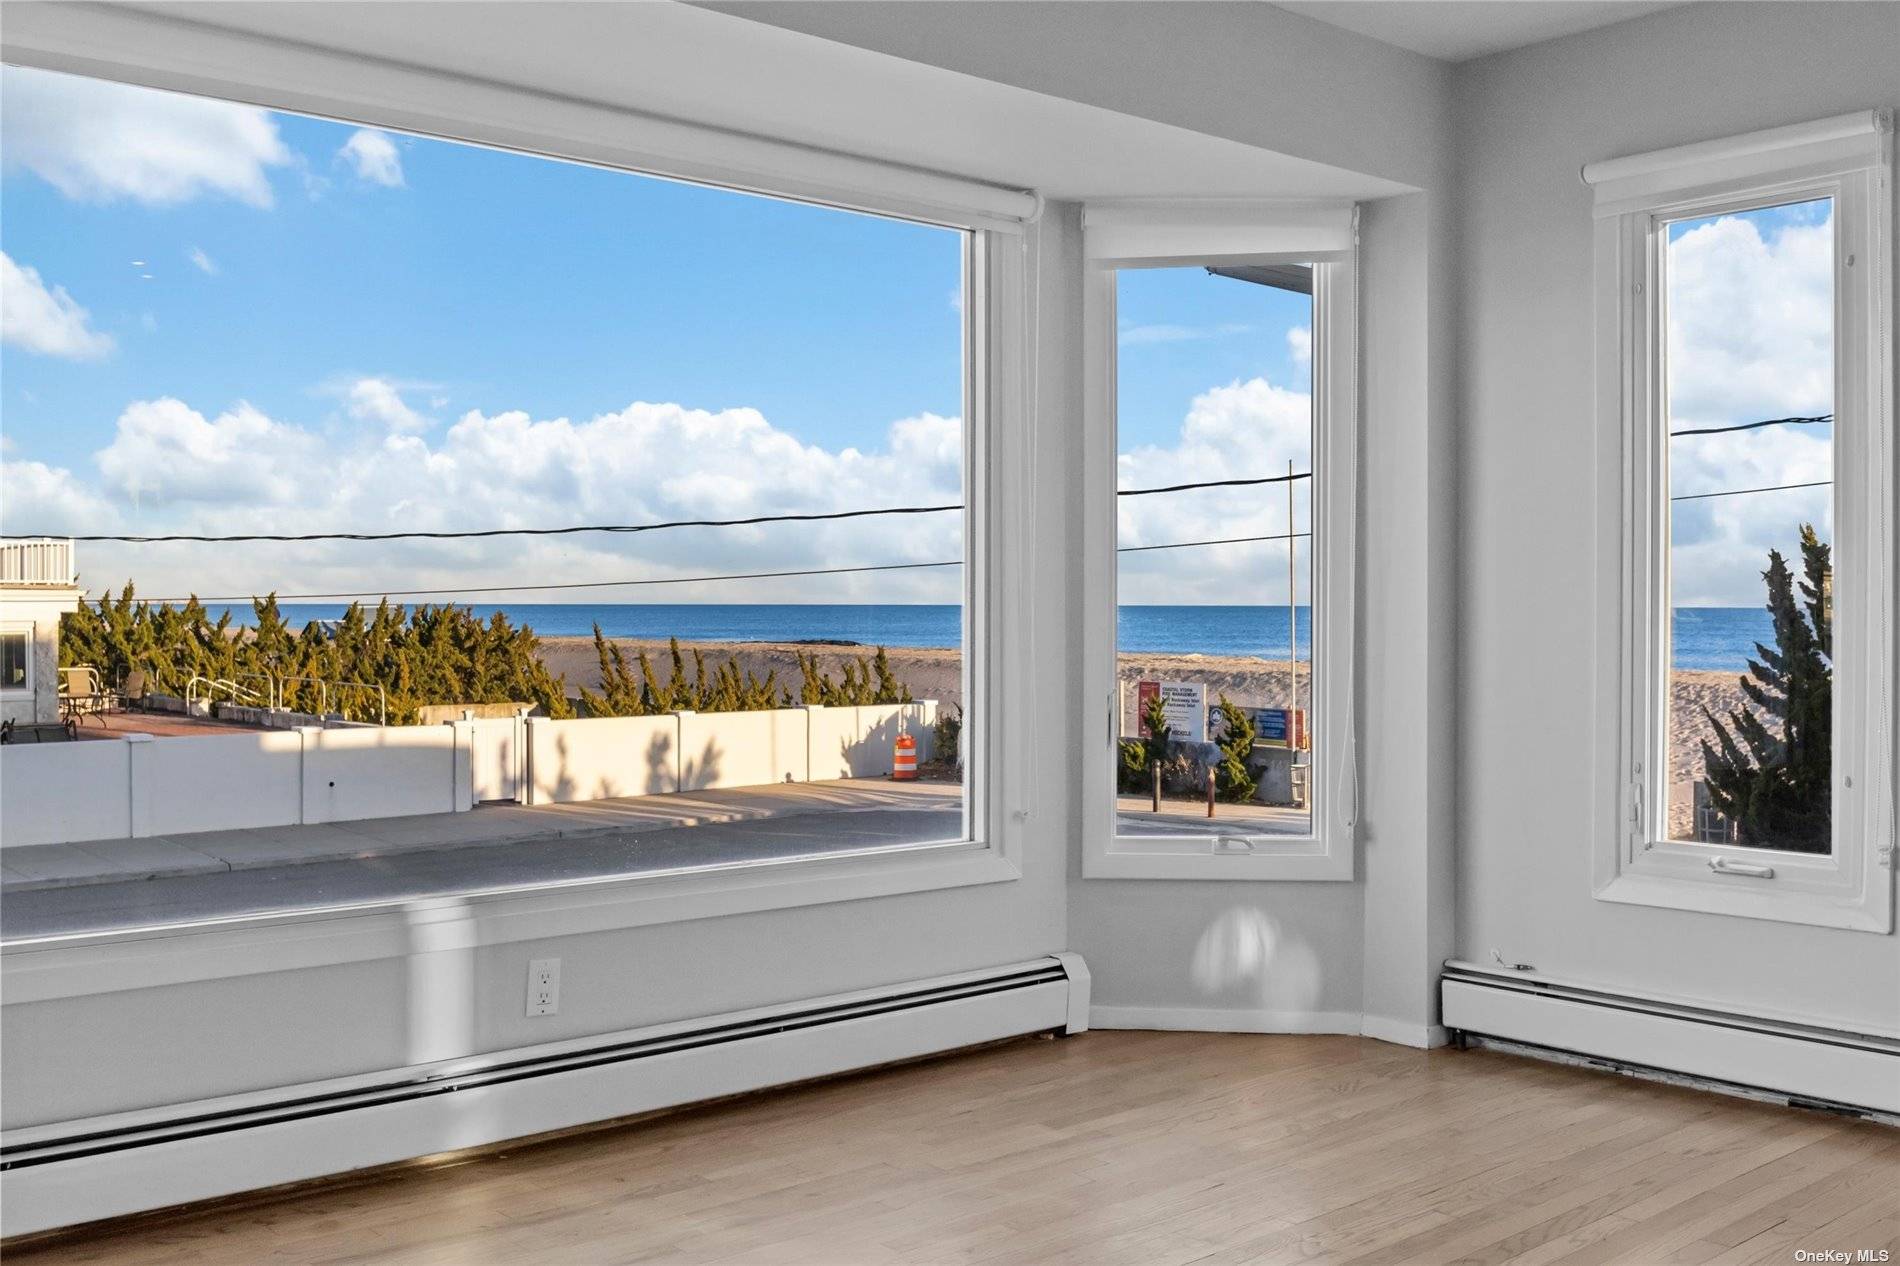 The oceanfront home of your dreams is up for Rent !